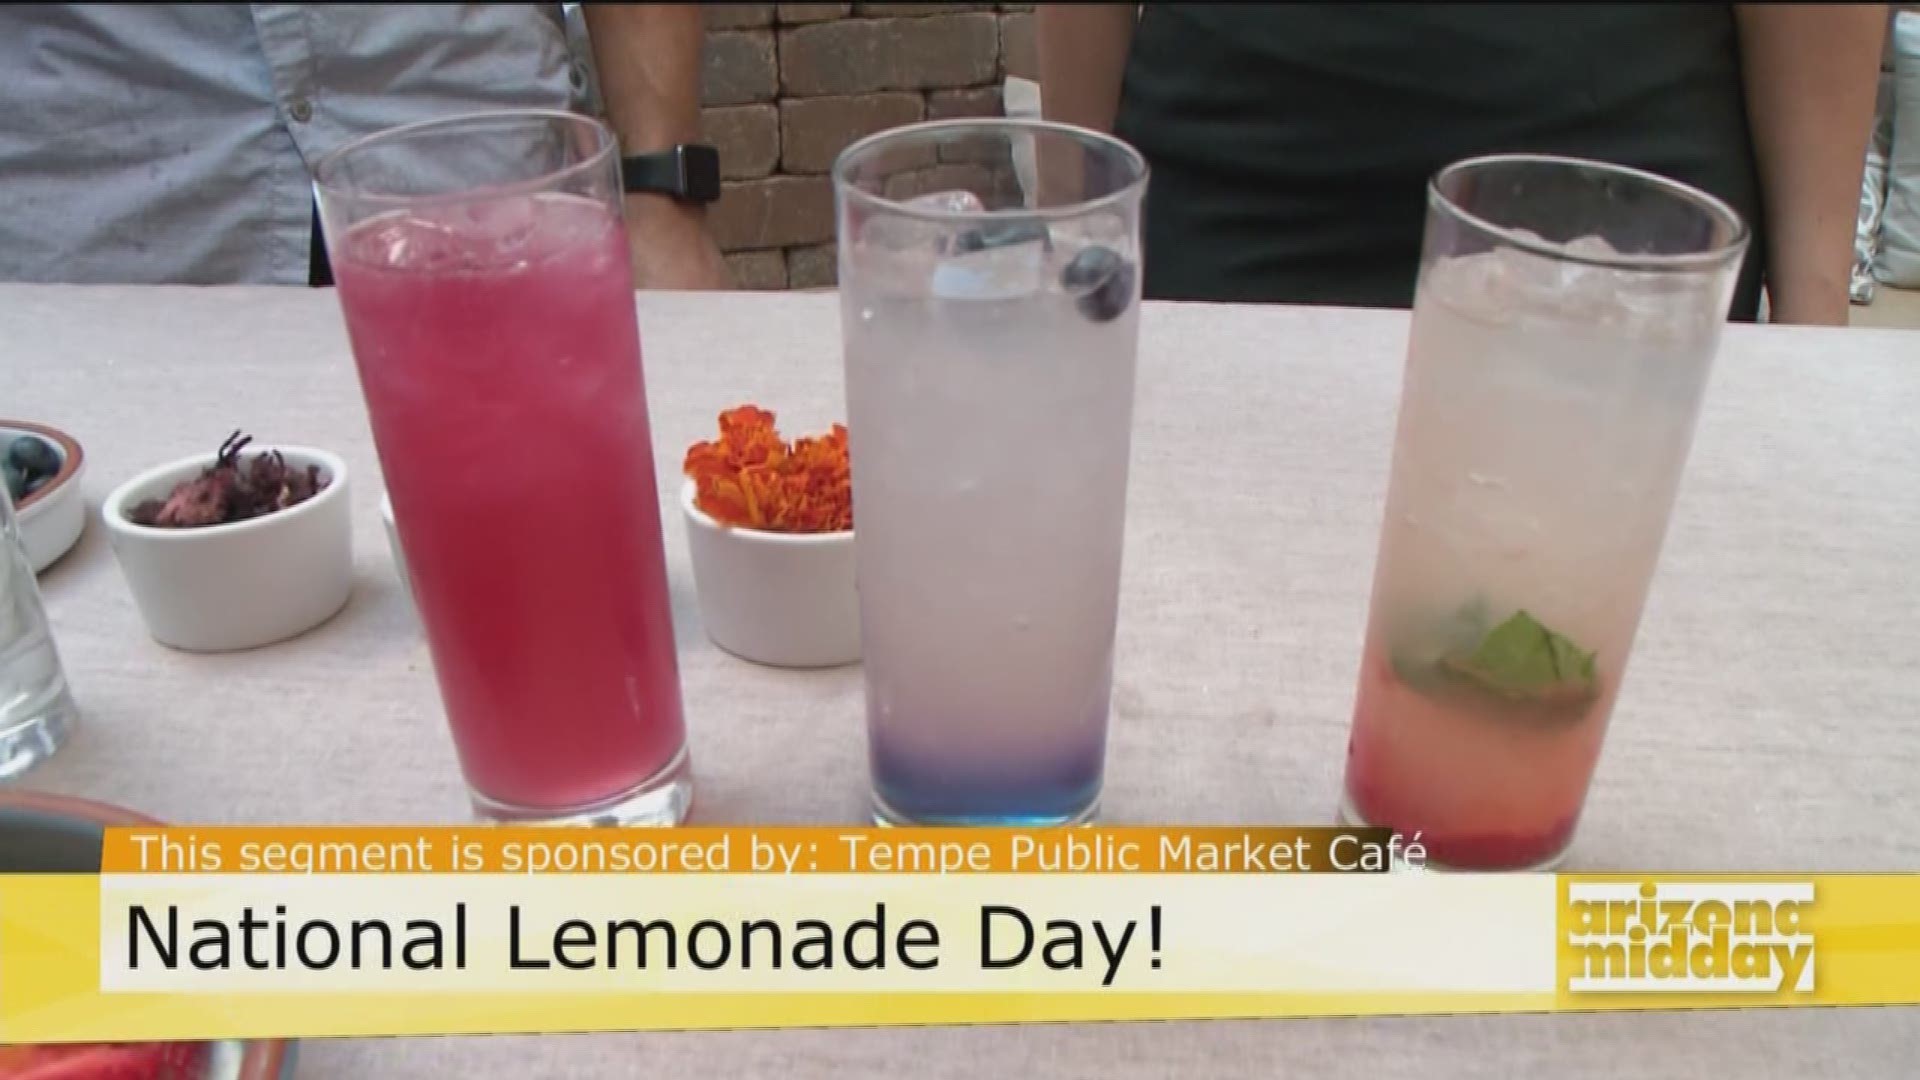 Chef LT Smith shows us how to create Magic Lemonade for National Lemonade Day and we take a look at the yummy eats at the Tempe Public Market